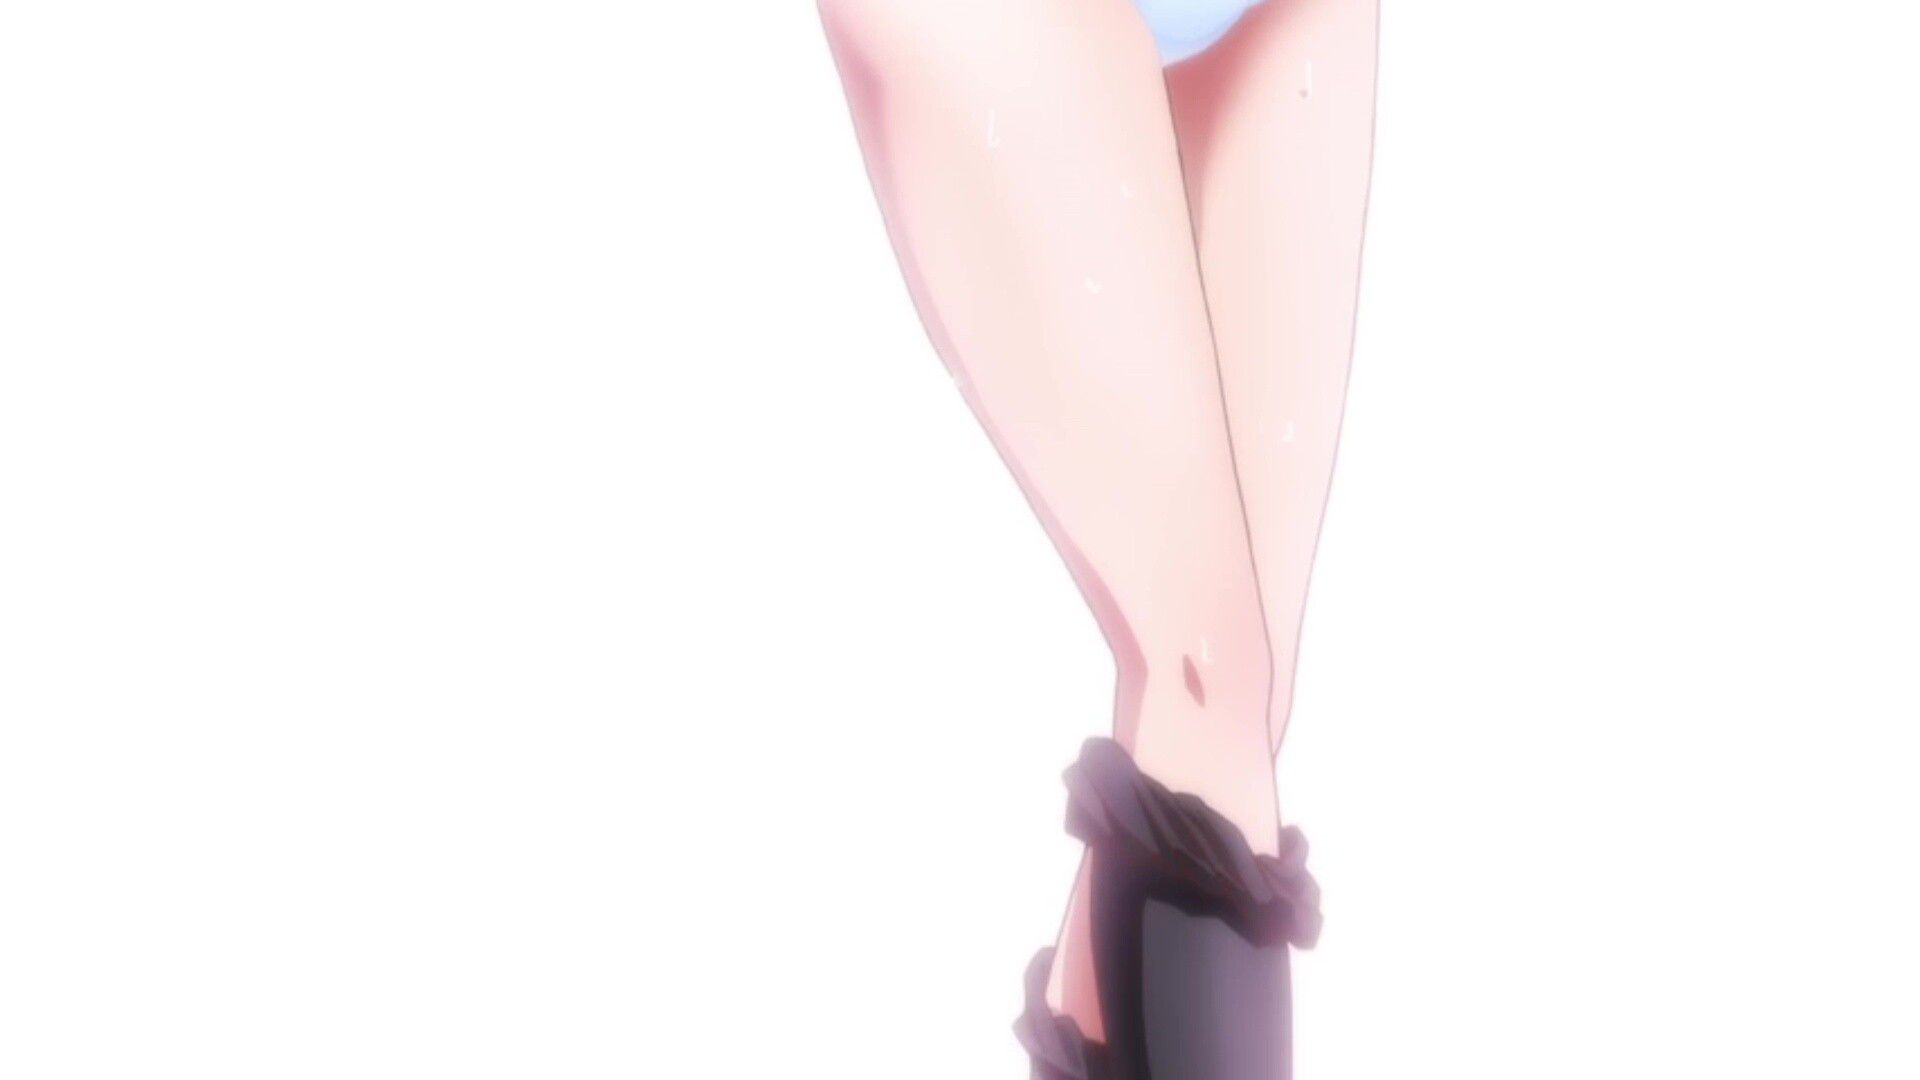 In episode 9 of the anime "Tomodachi Game", an erotic scene in which pants and bra are transparent in the depiction of underwear that is too erotic 13